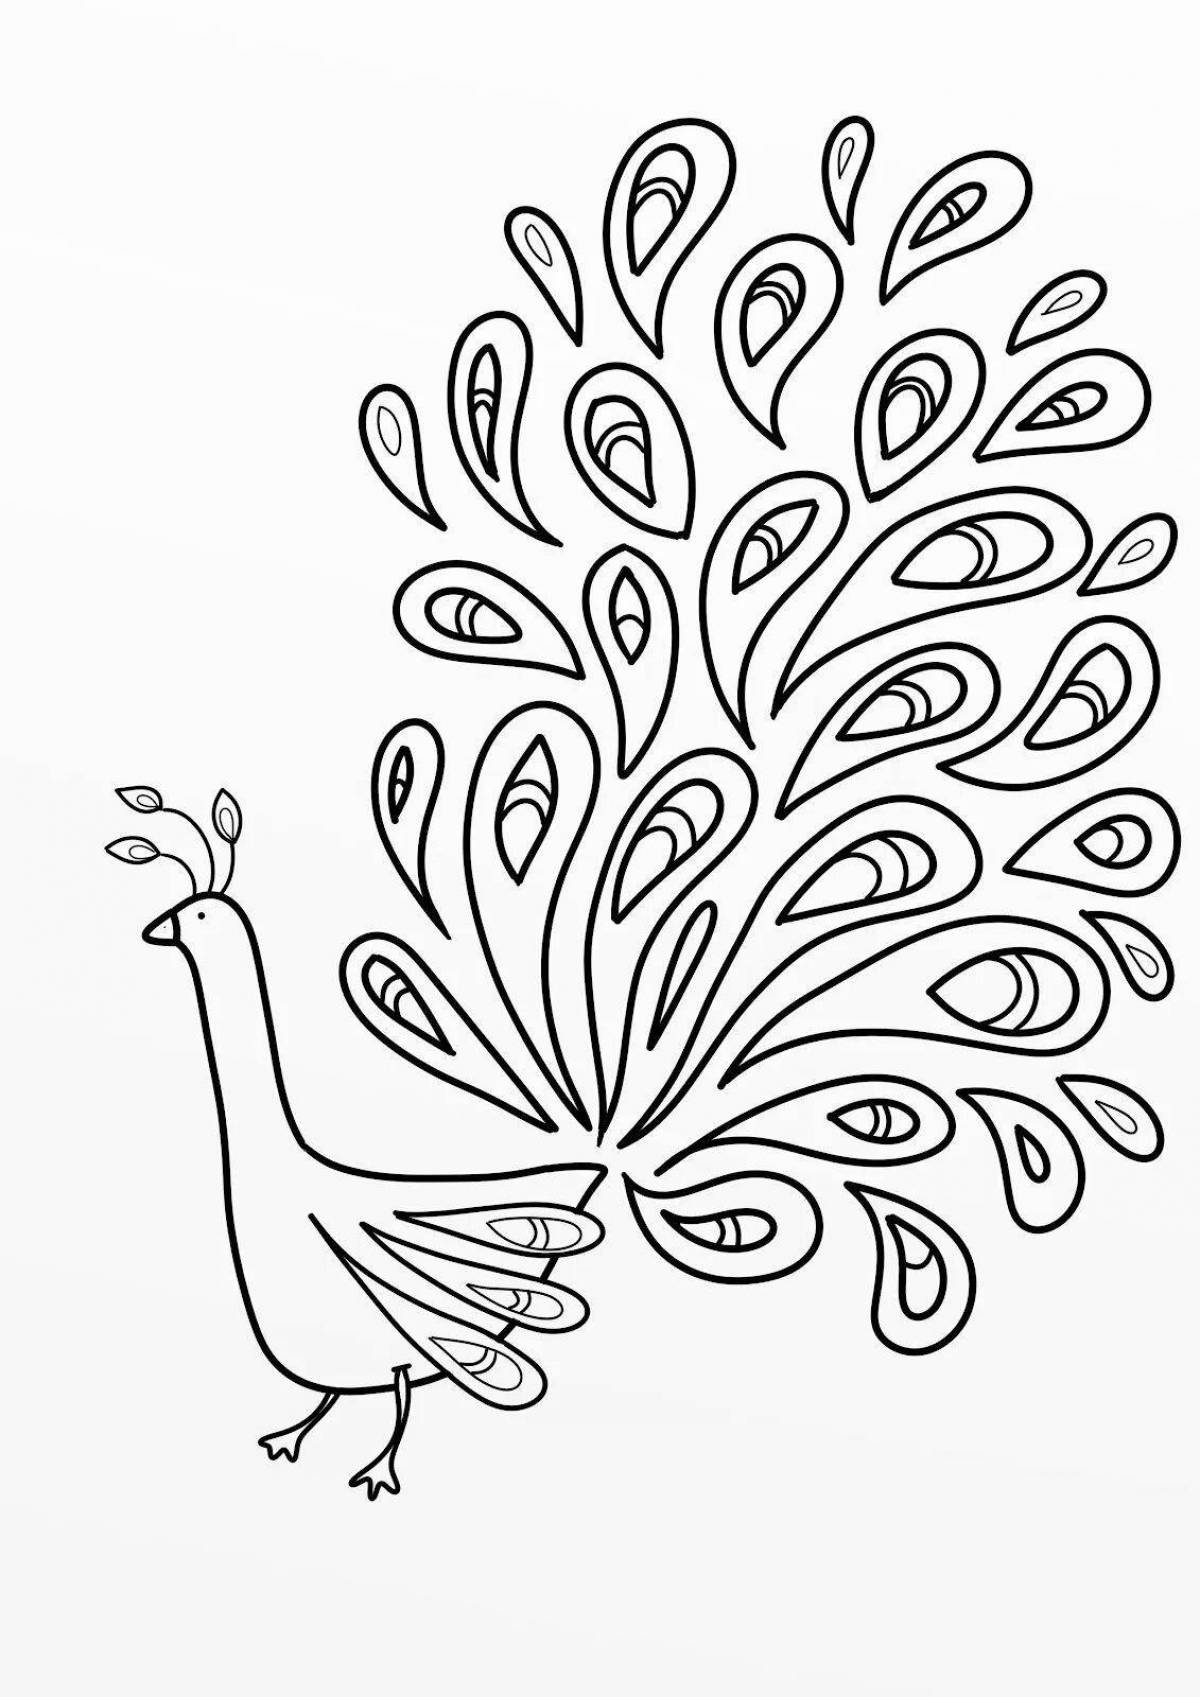 Glittering peacock feather coloring book for kids